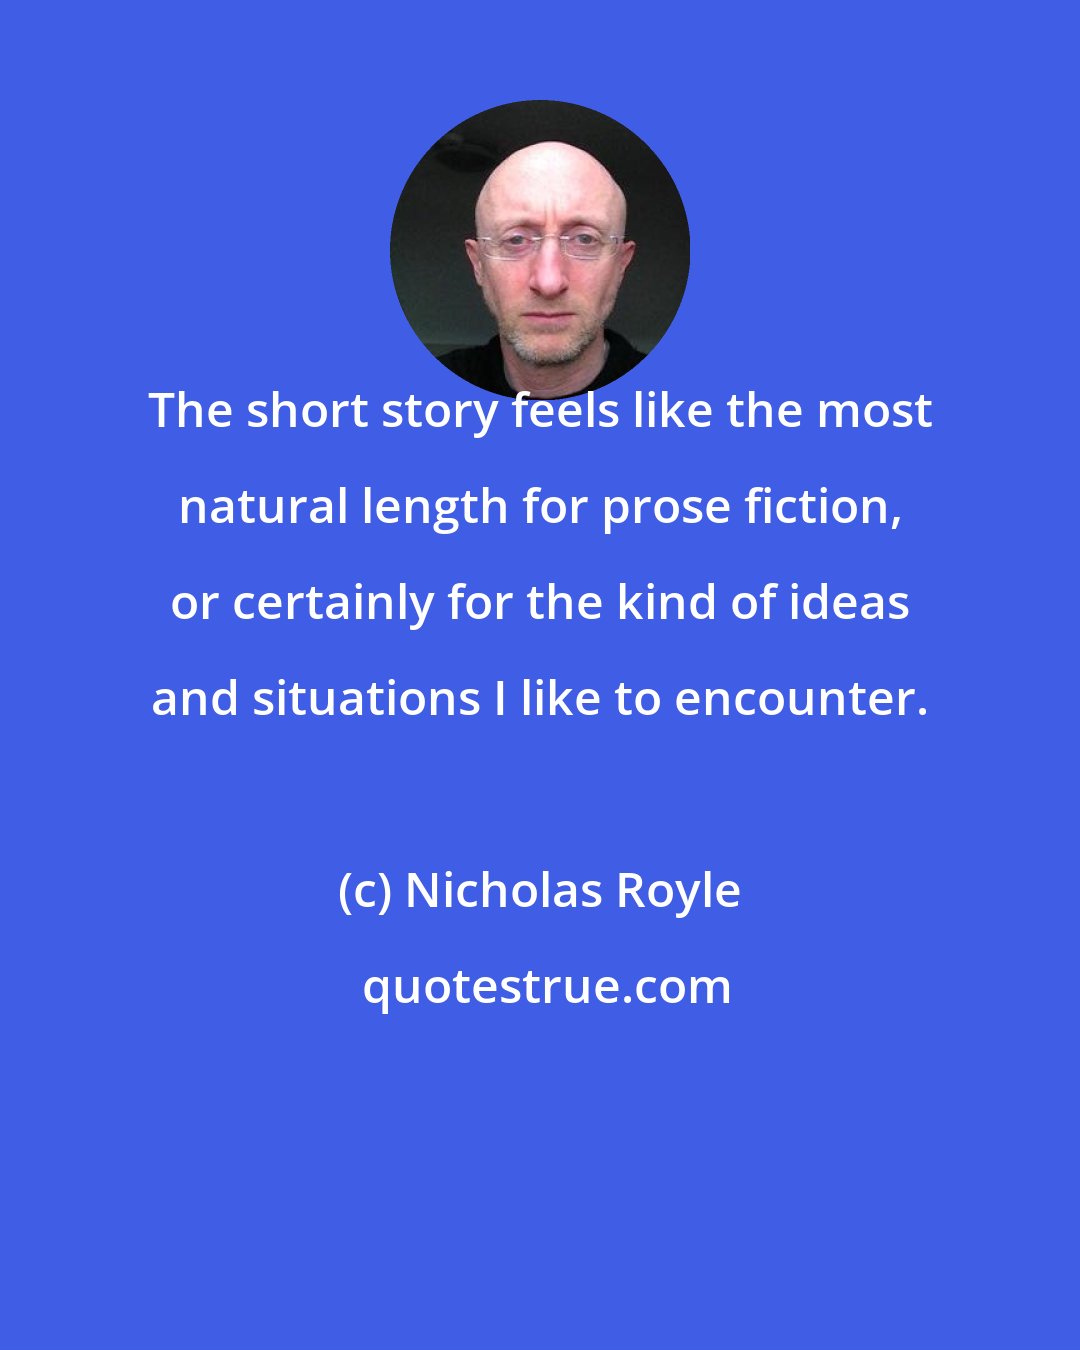 Nicholas Royle: The short story feels like the most natural length for prose fiction, or certainly for the kind of ideas and situations I like to encounter.